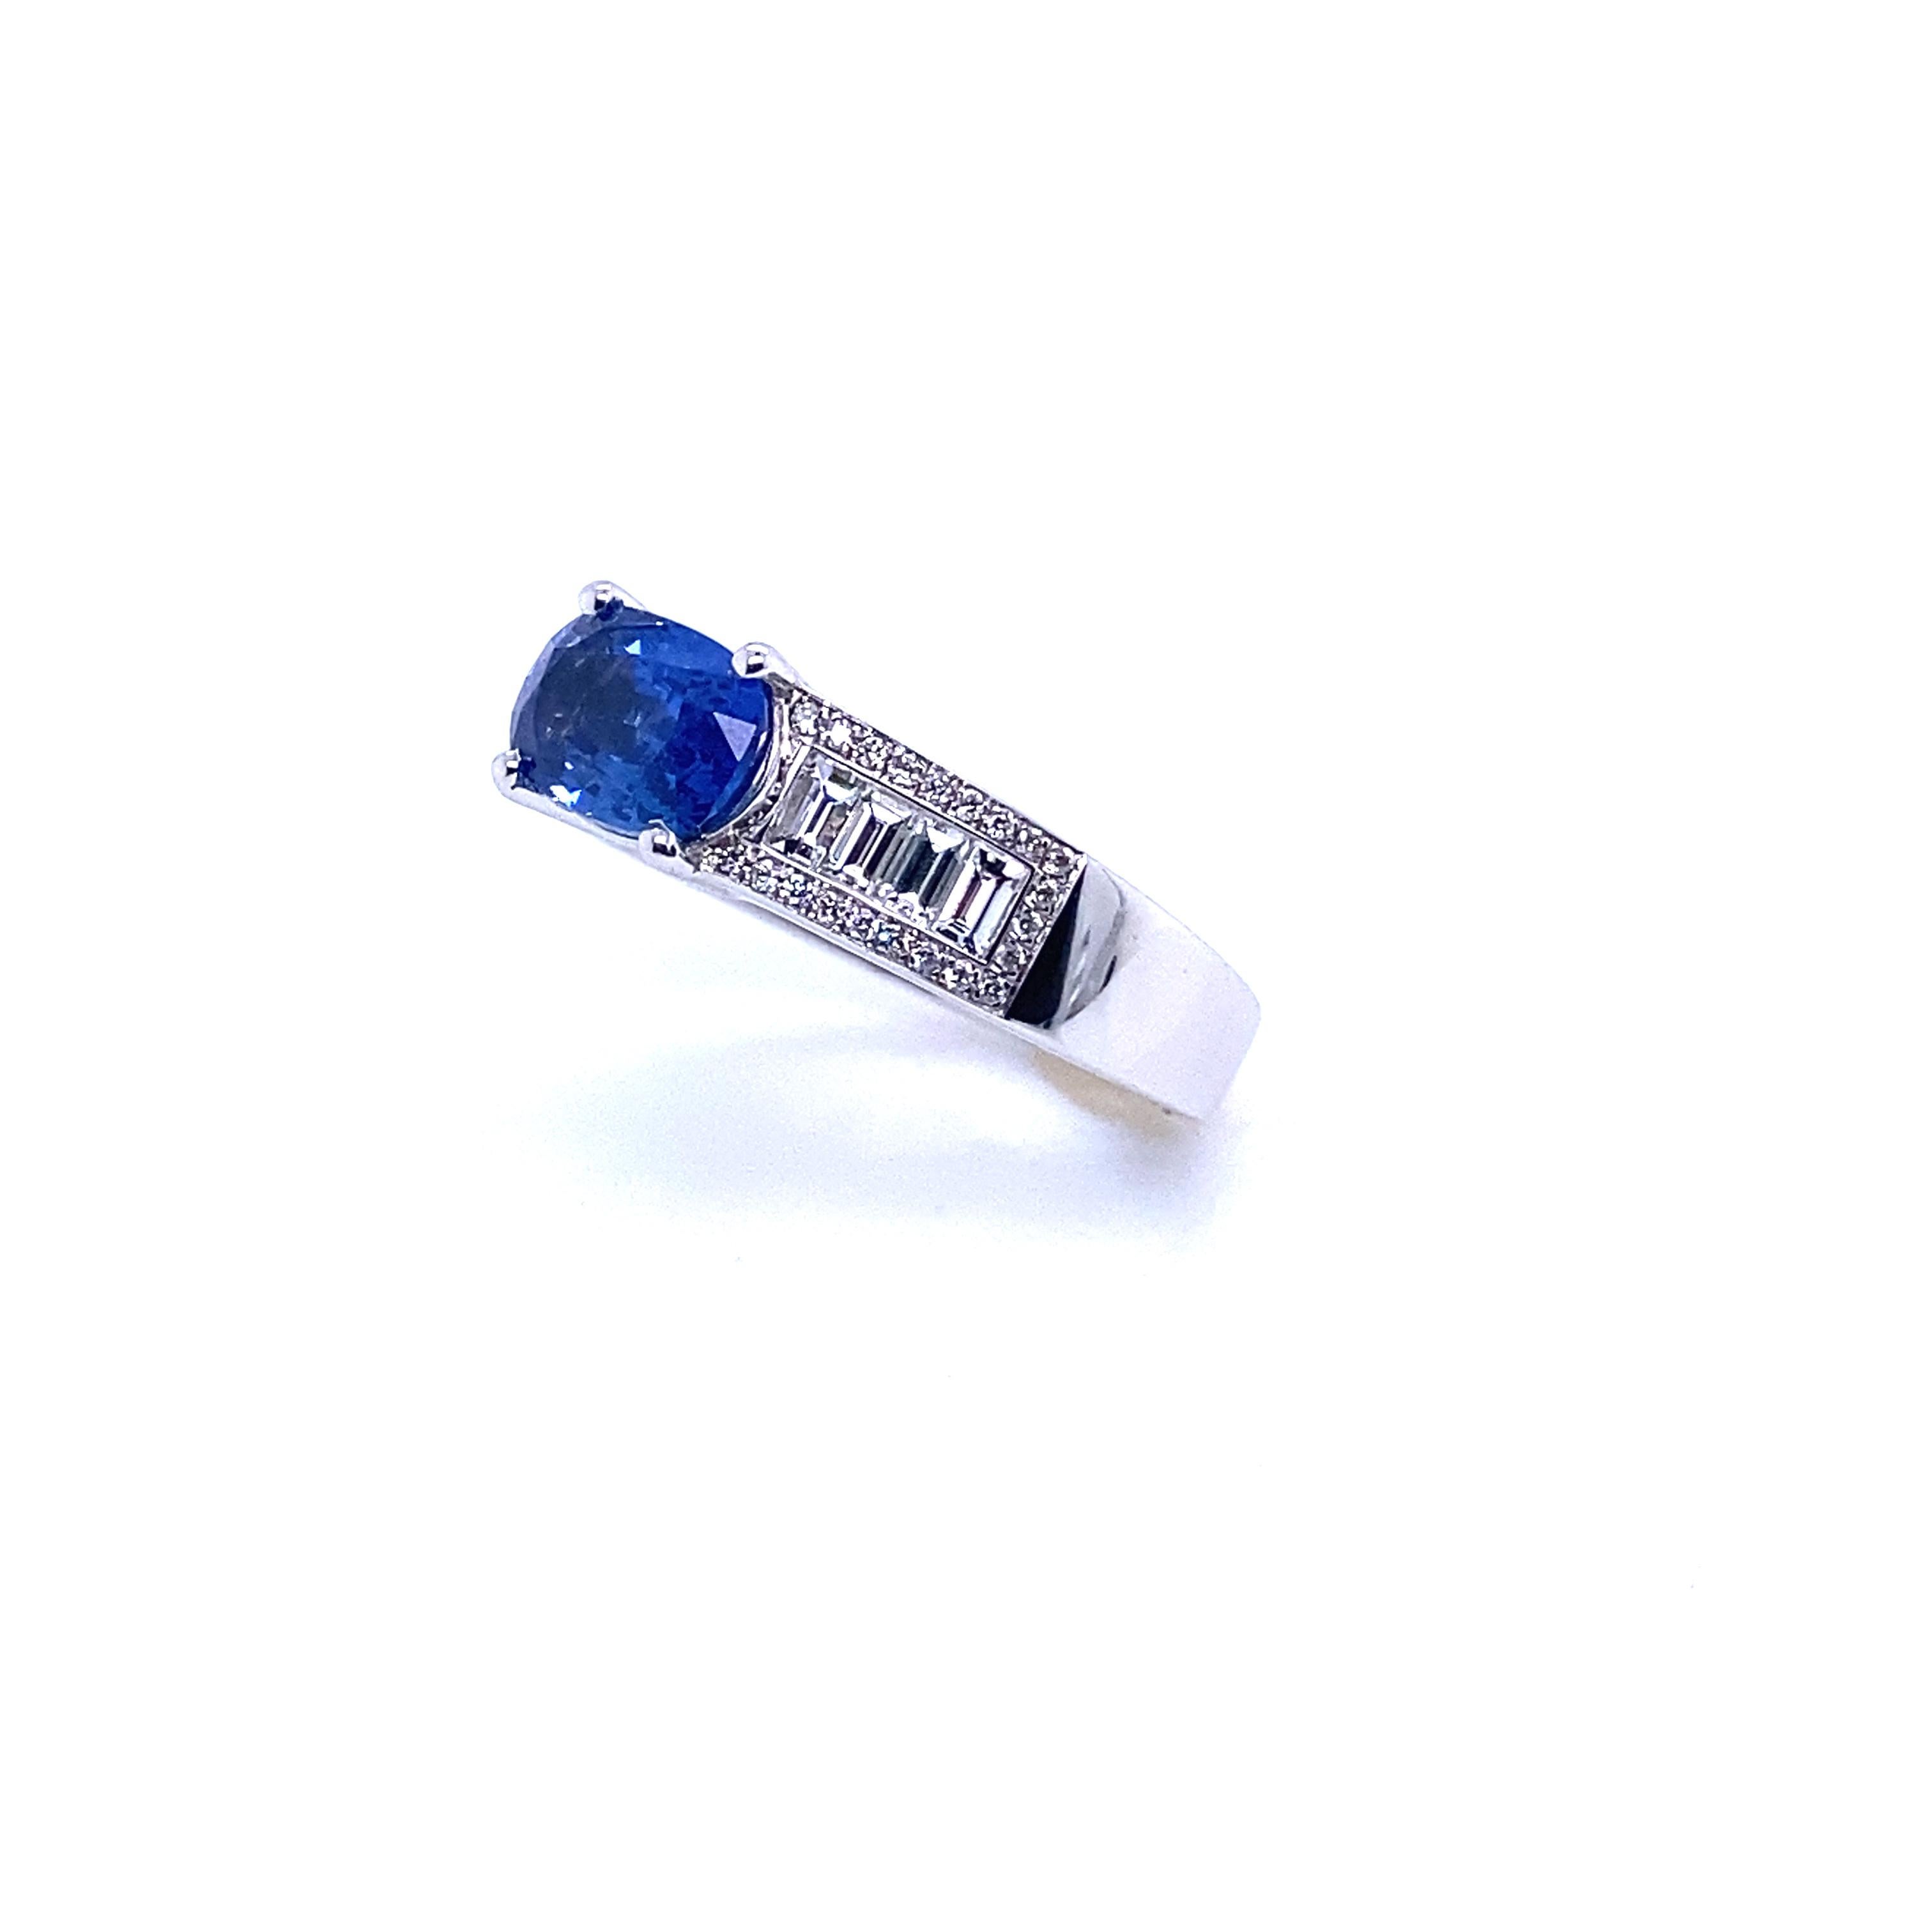 French Engagement Ring White Gold with a Blue Sapphire and Diamonds
French Collection by Mesure et Art du Temps.

This ring is surmounted by a cushion-cut blue sapphire of 1.74 carats. 
It is accompanied by 8 baguette-cut diamonds of 0.36 carats and